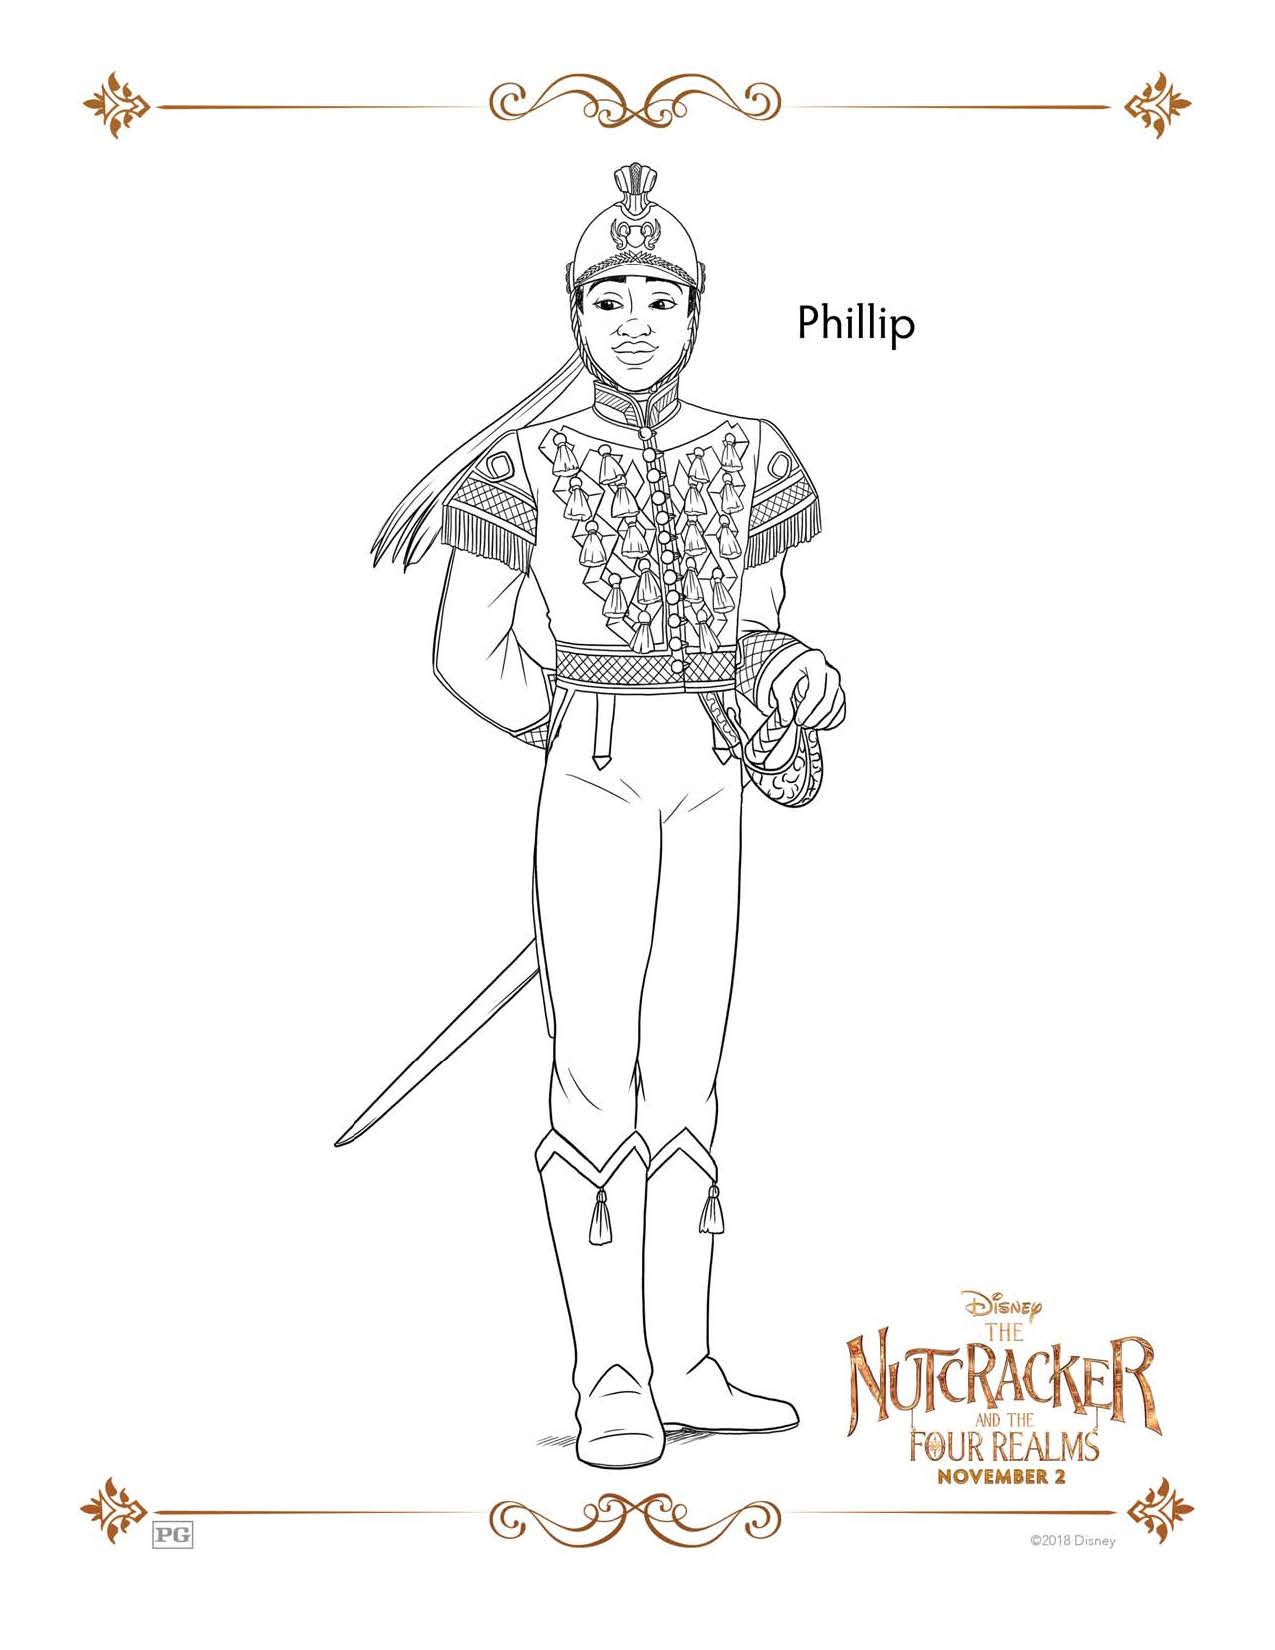 Phillip - The Nutcracker and The Four Realms Coloring Pages and Activity Sheets